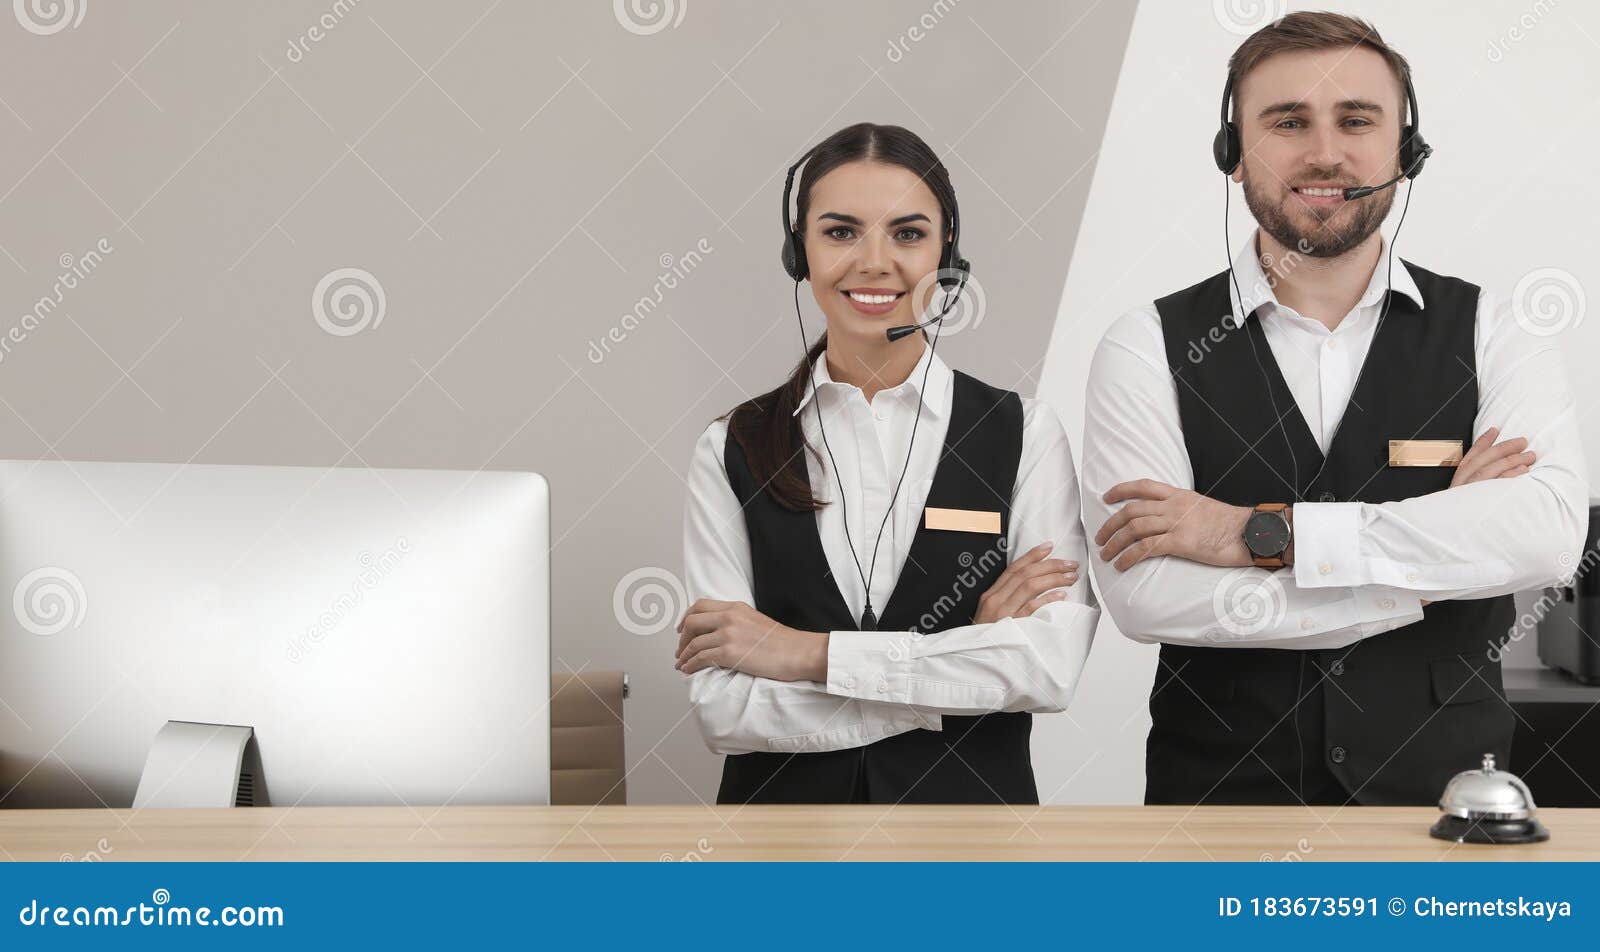 receptionists in uniform at workplace. banner 